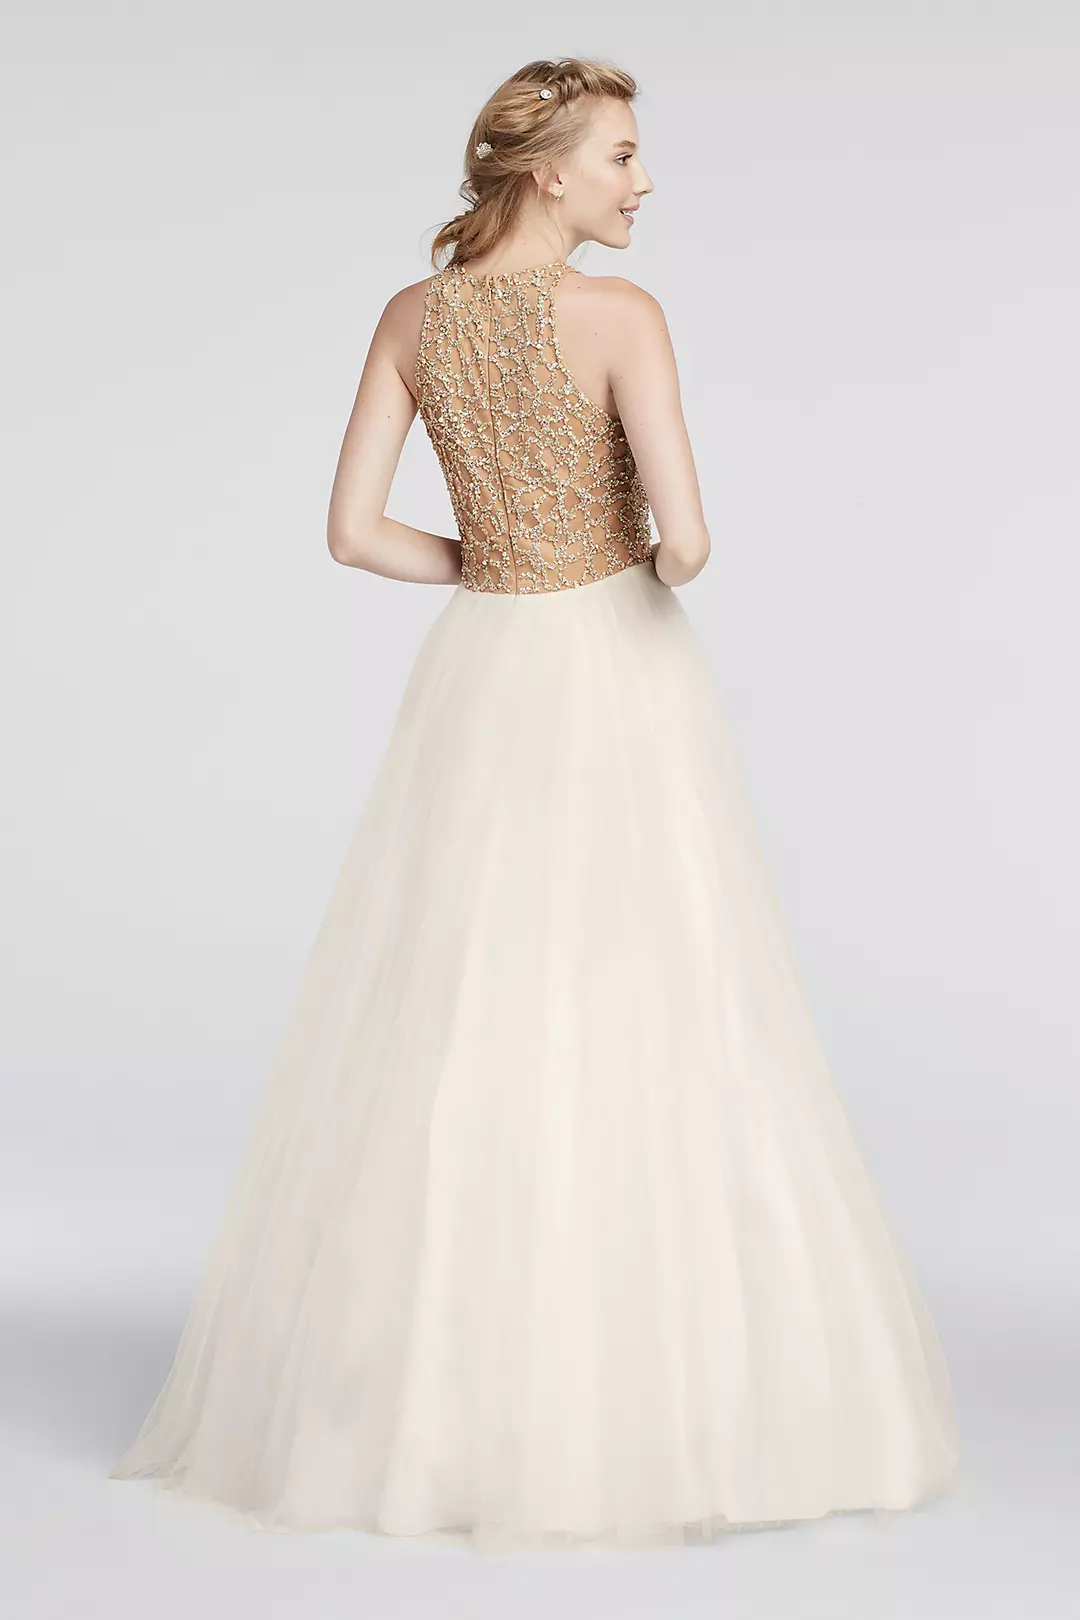 Beaded High Neck Prom Dress with Ball Gown Skirt Image 2